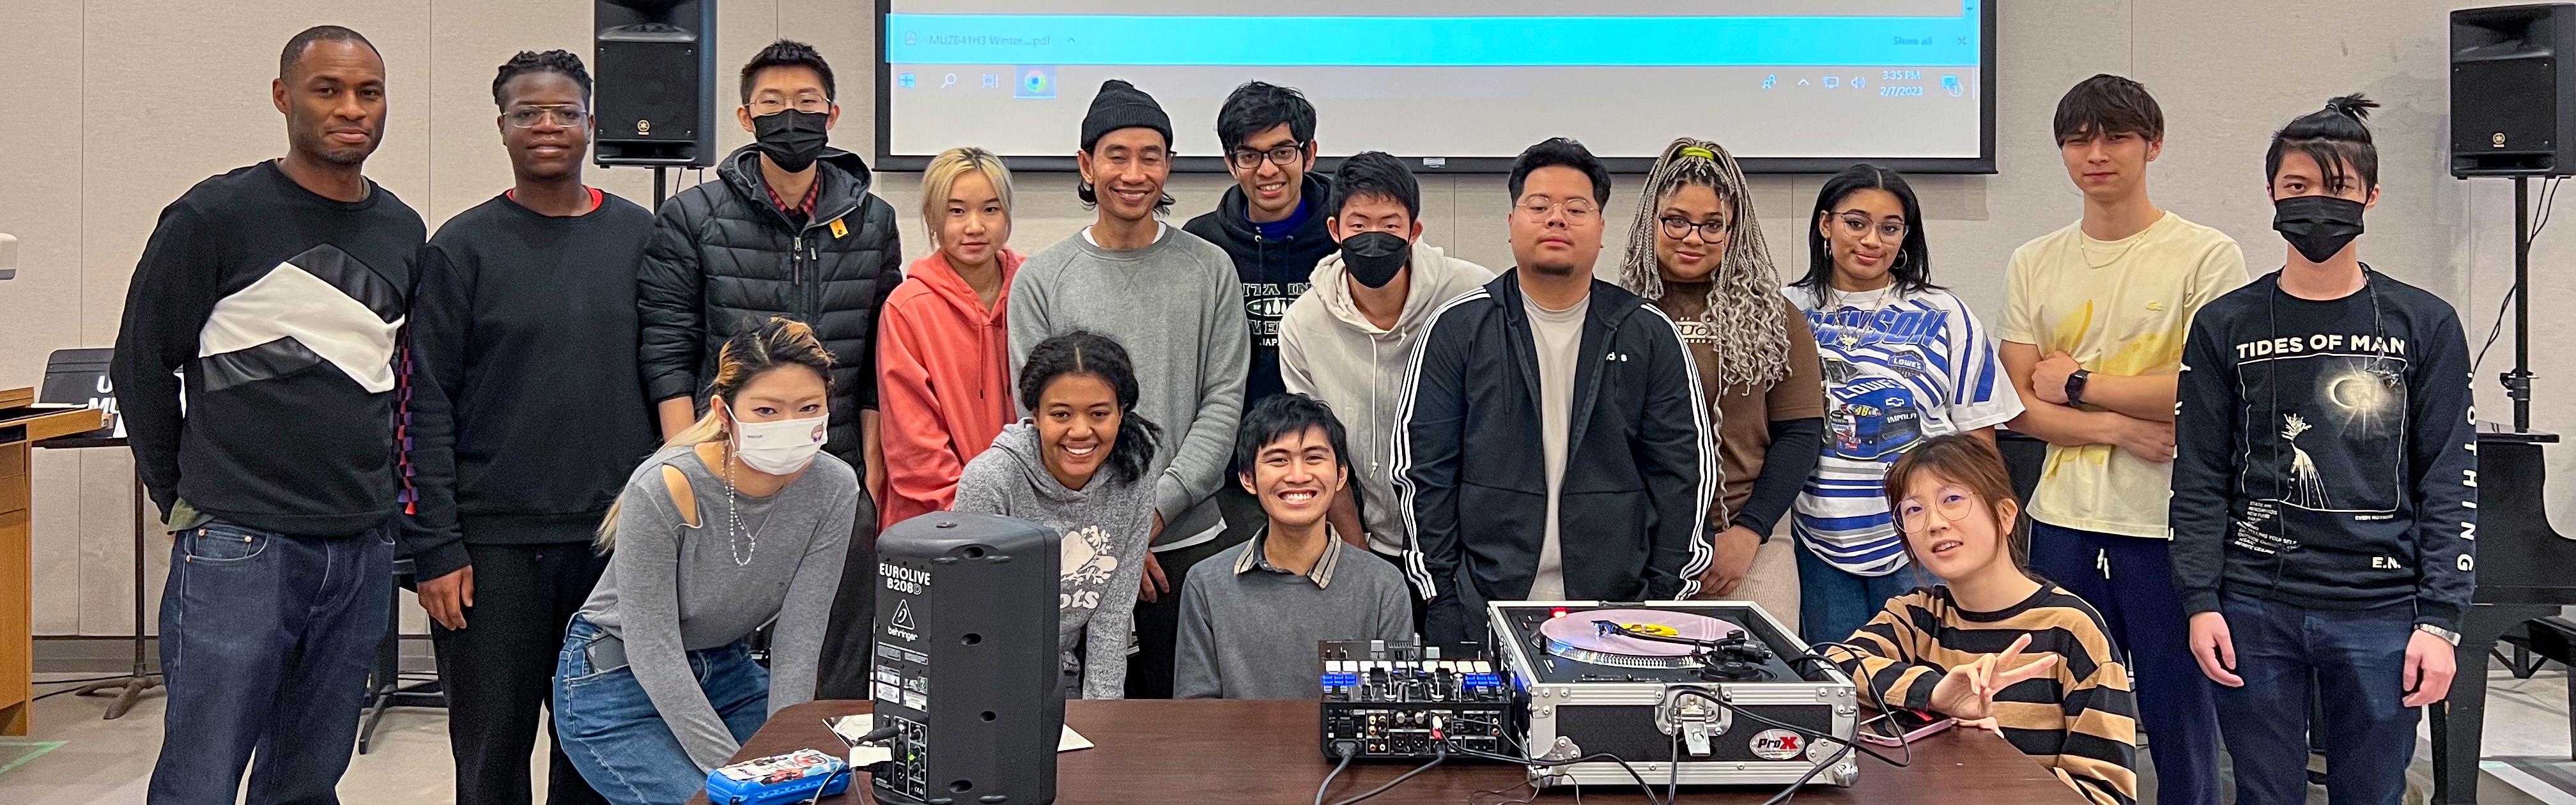 Music and culture students with equipment in front of a screen